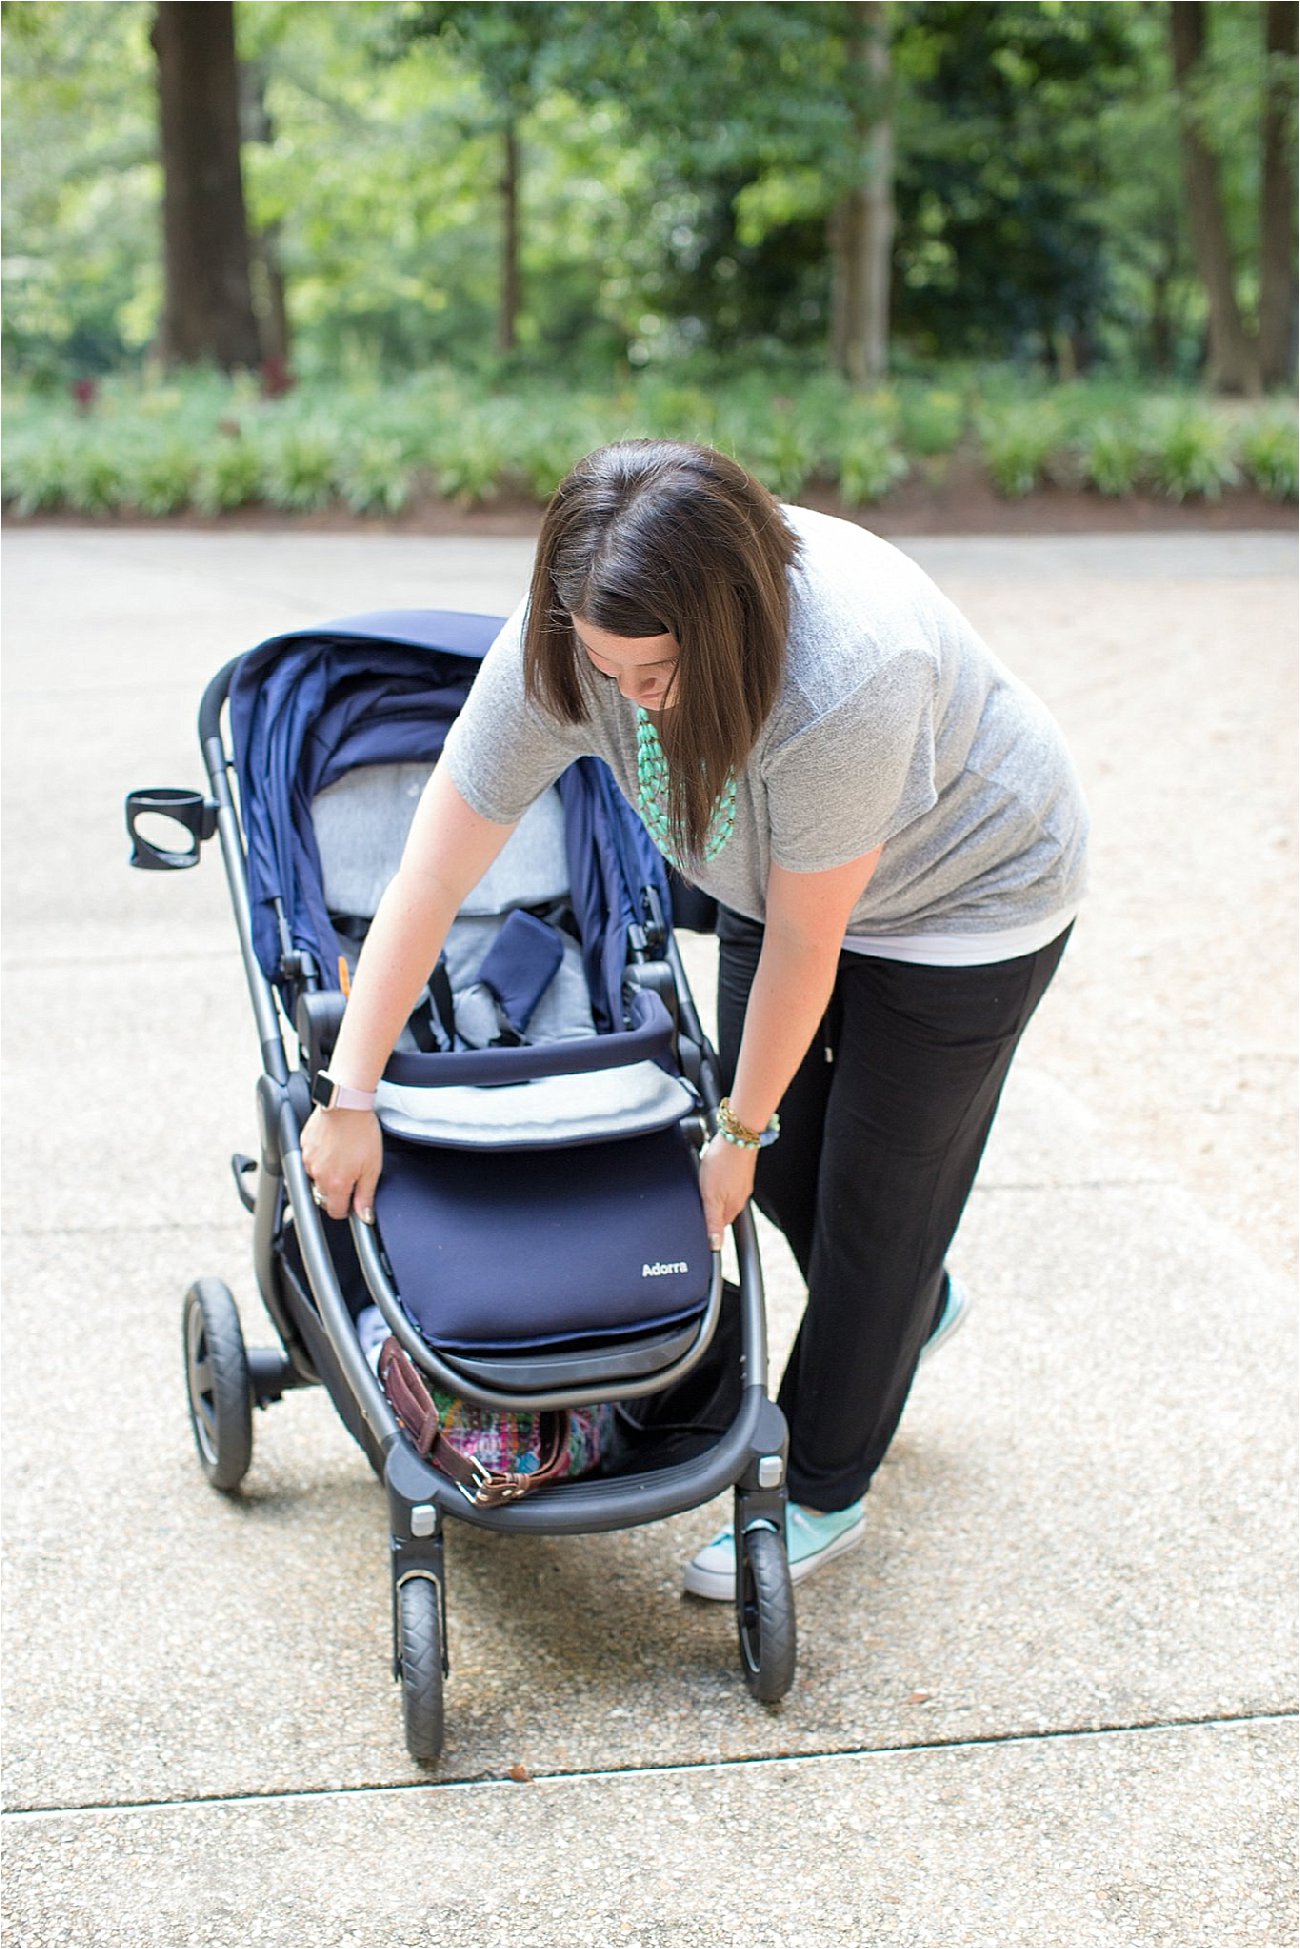 Maxi Cosi Adorra Review by lifestyle blogger Still Being Molly